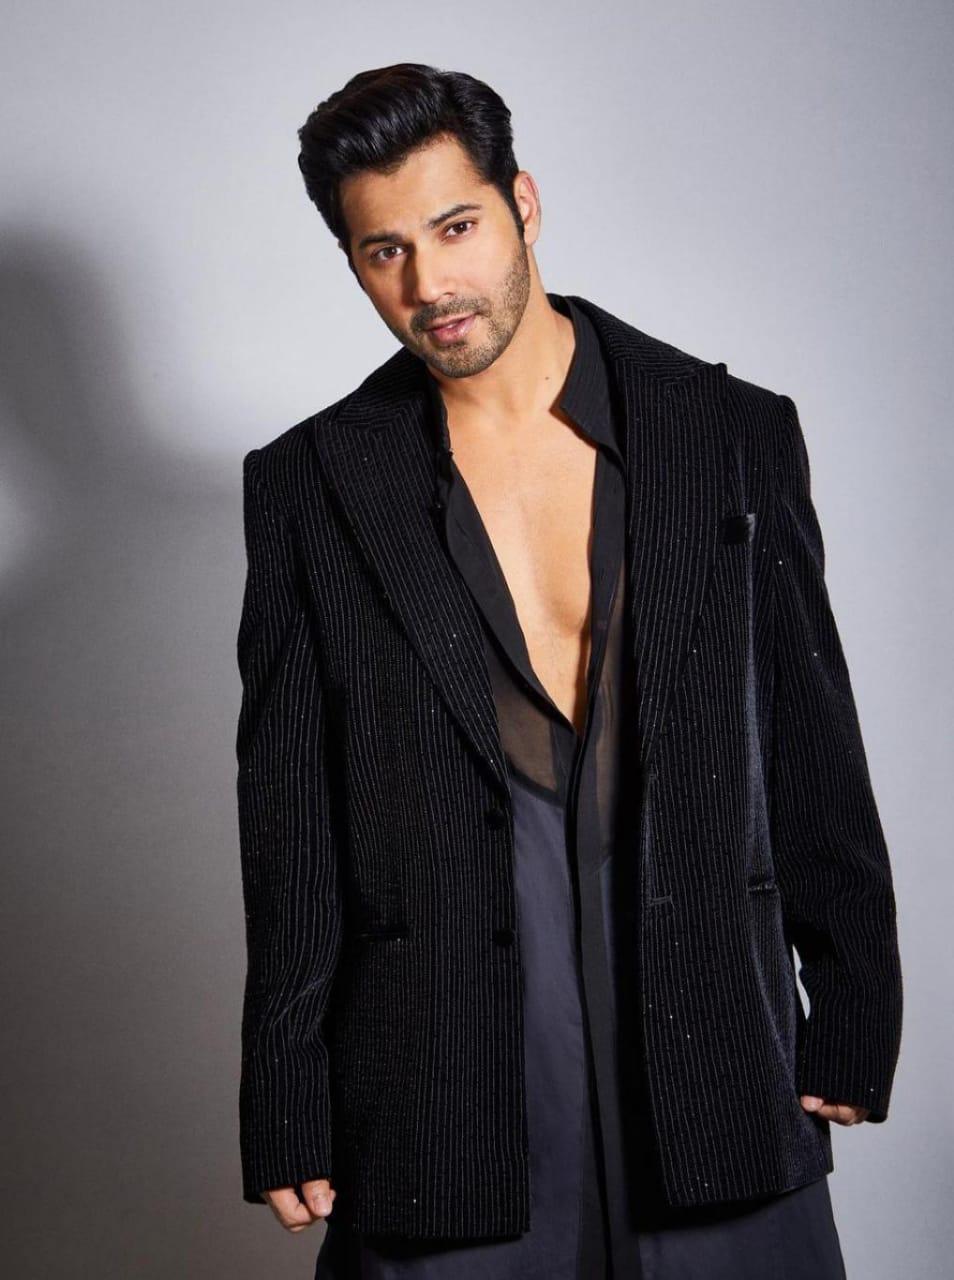 Varun Dhawan's vibrant and versatile fashion sense is a breath of fresh air. From bold patterns to muted tones, Dhawan embraces a wide spectrum of styles, reflecting his dynamic personality. His ability to pull off diverse looks with equal panache makes him a style chameleon in the industry.